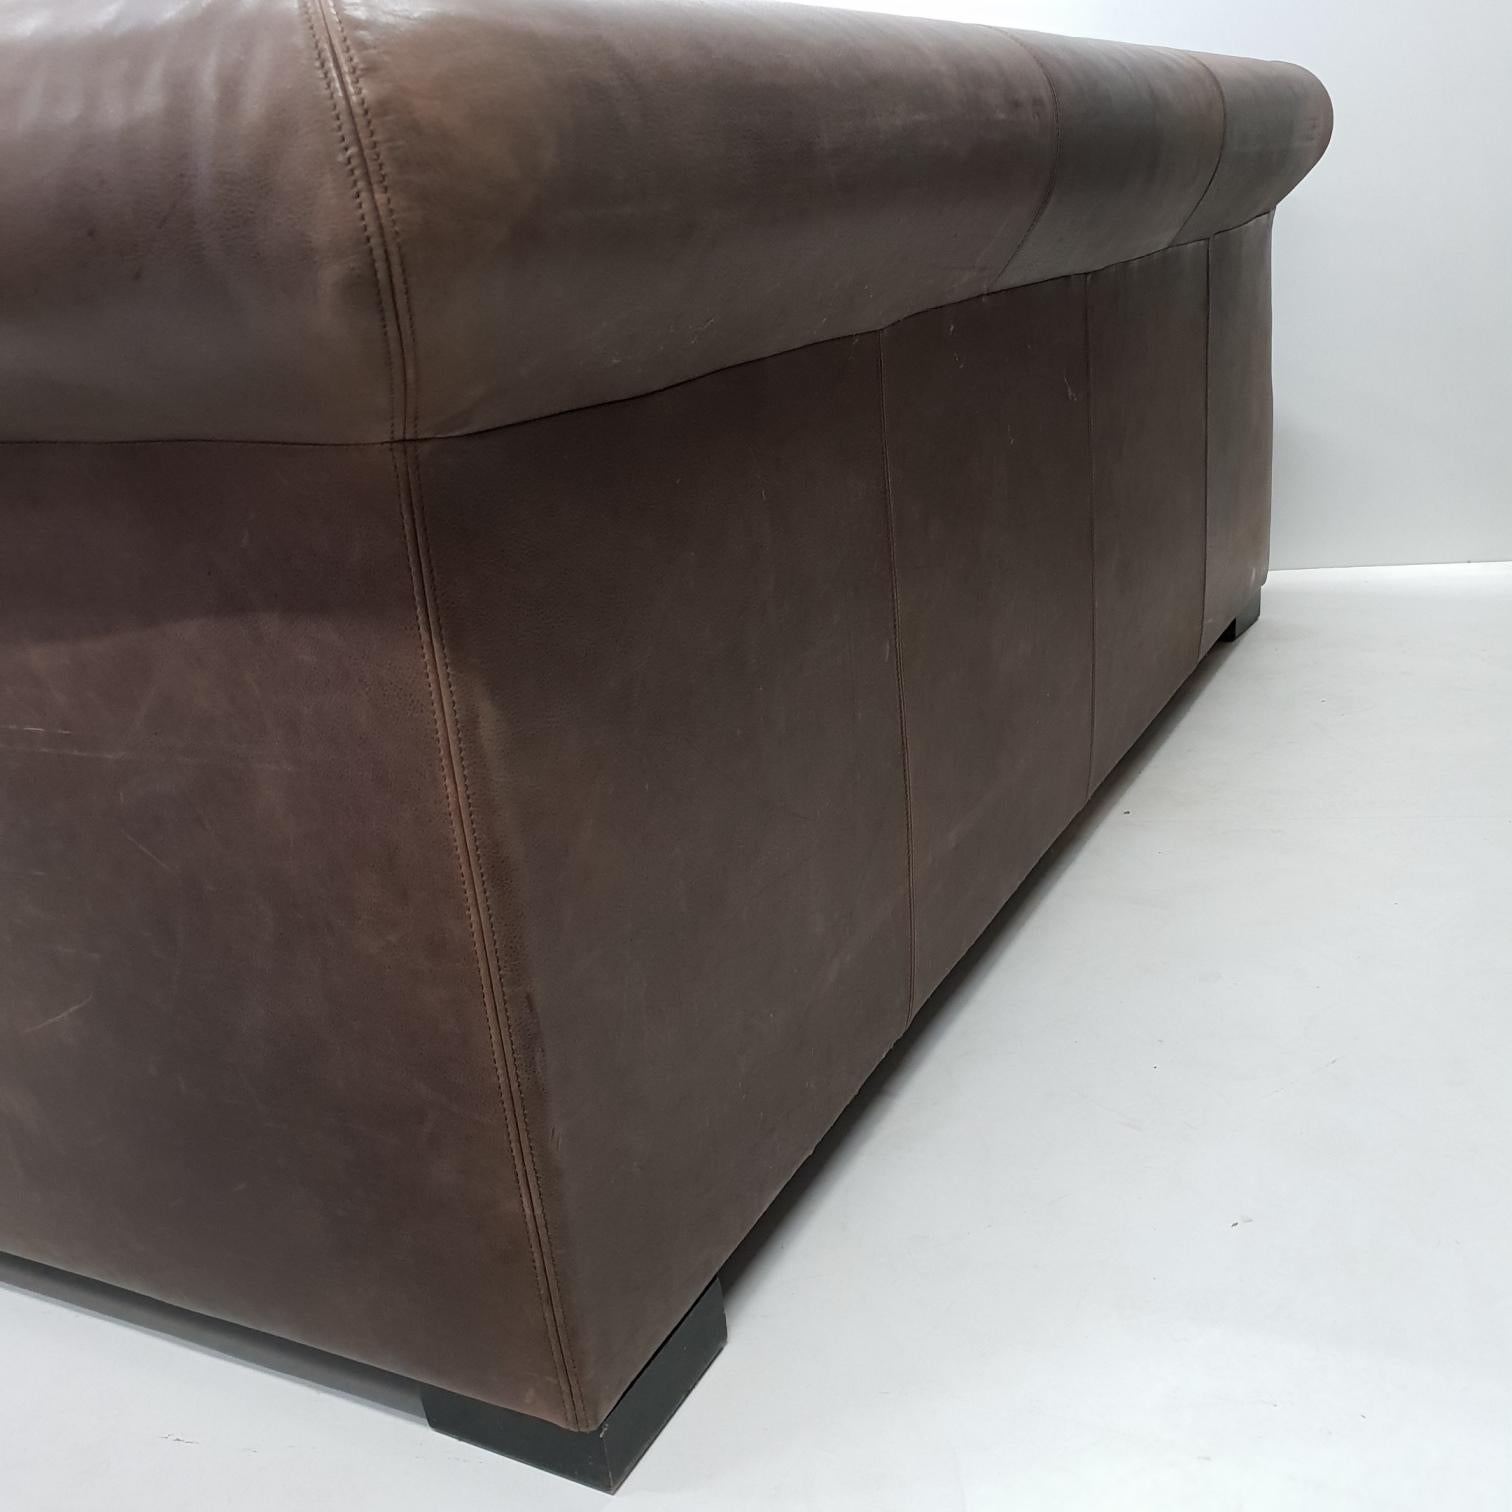 Industrial Brown Leather 3-Seat Sofa Model Alfred P. by Marco Milisich for Bax For Sale 2